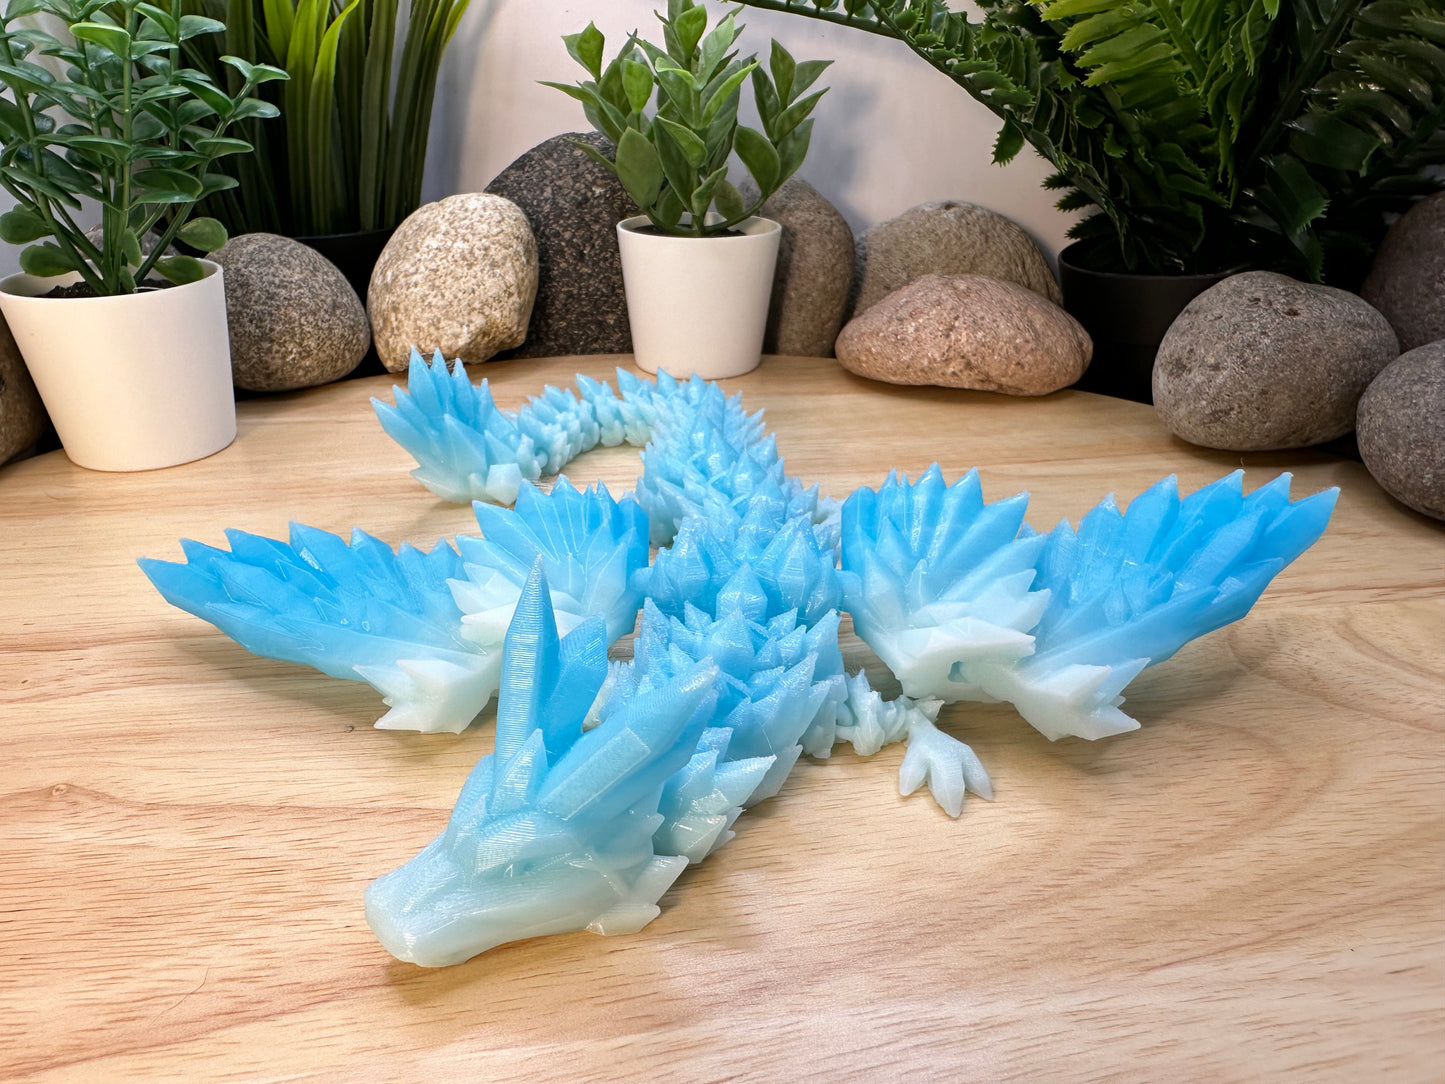 Crystalwing Dragons